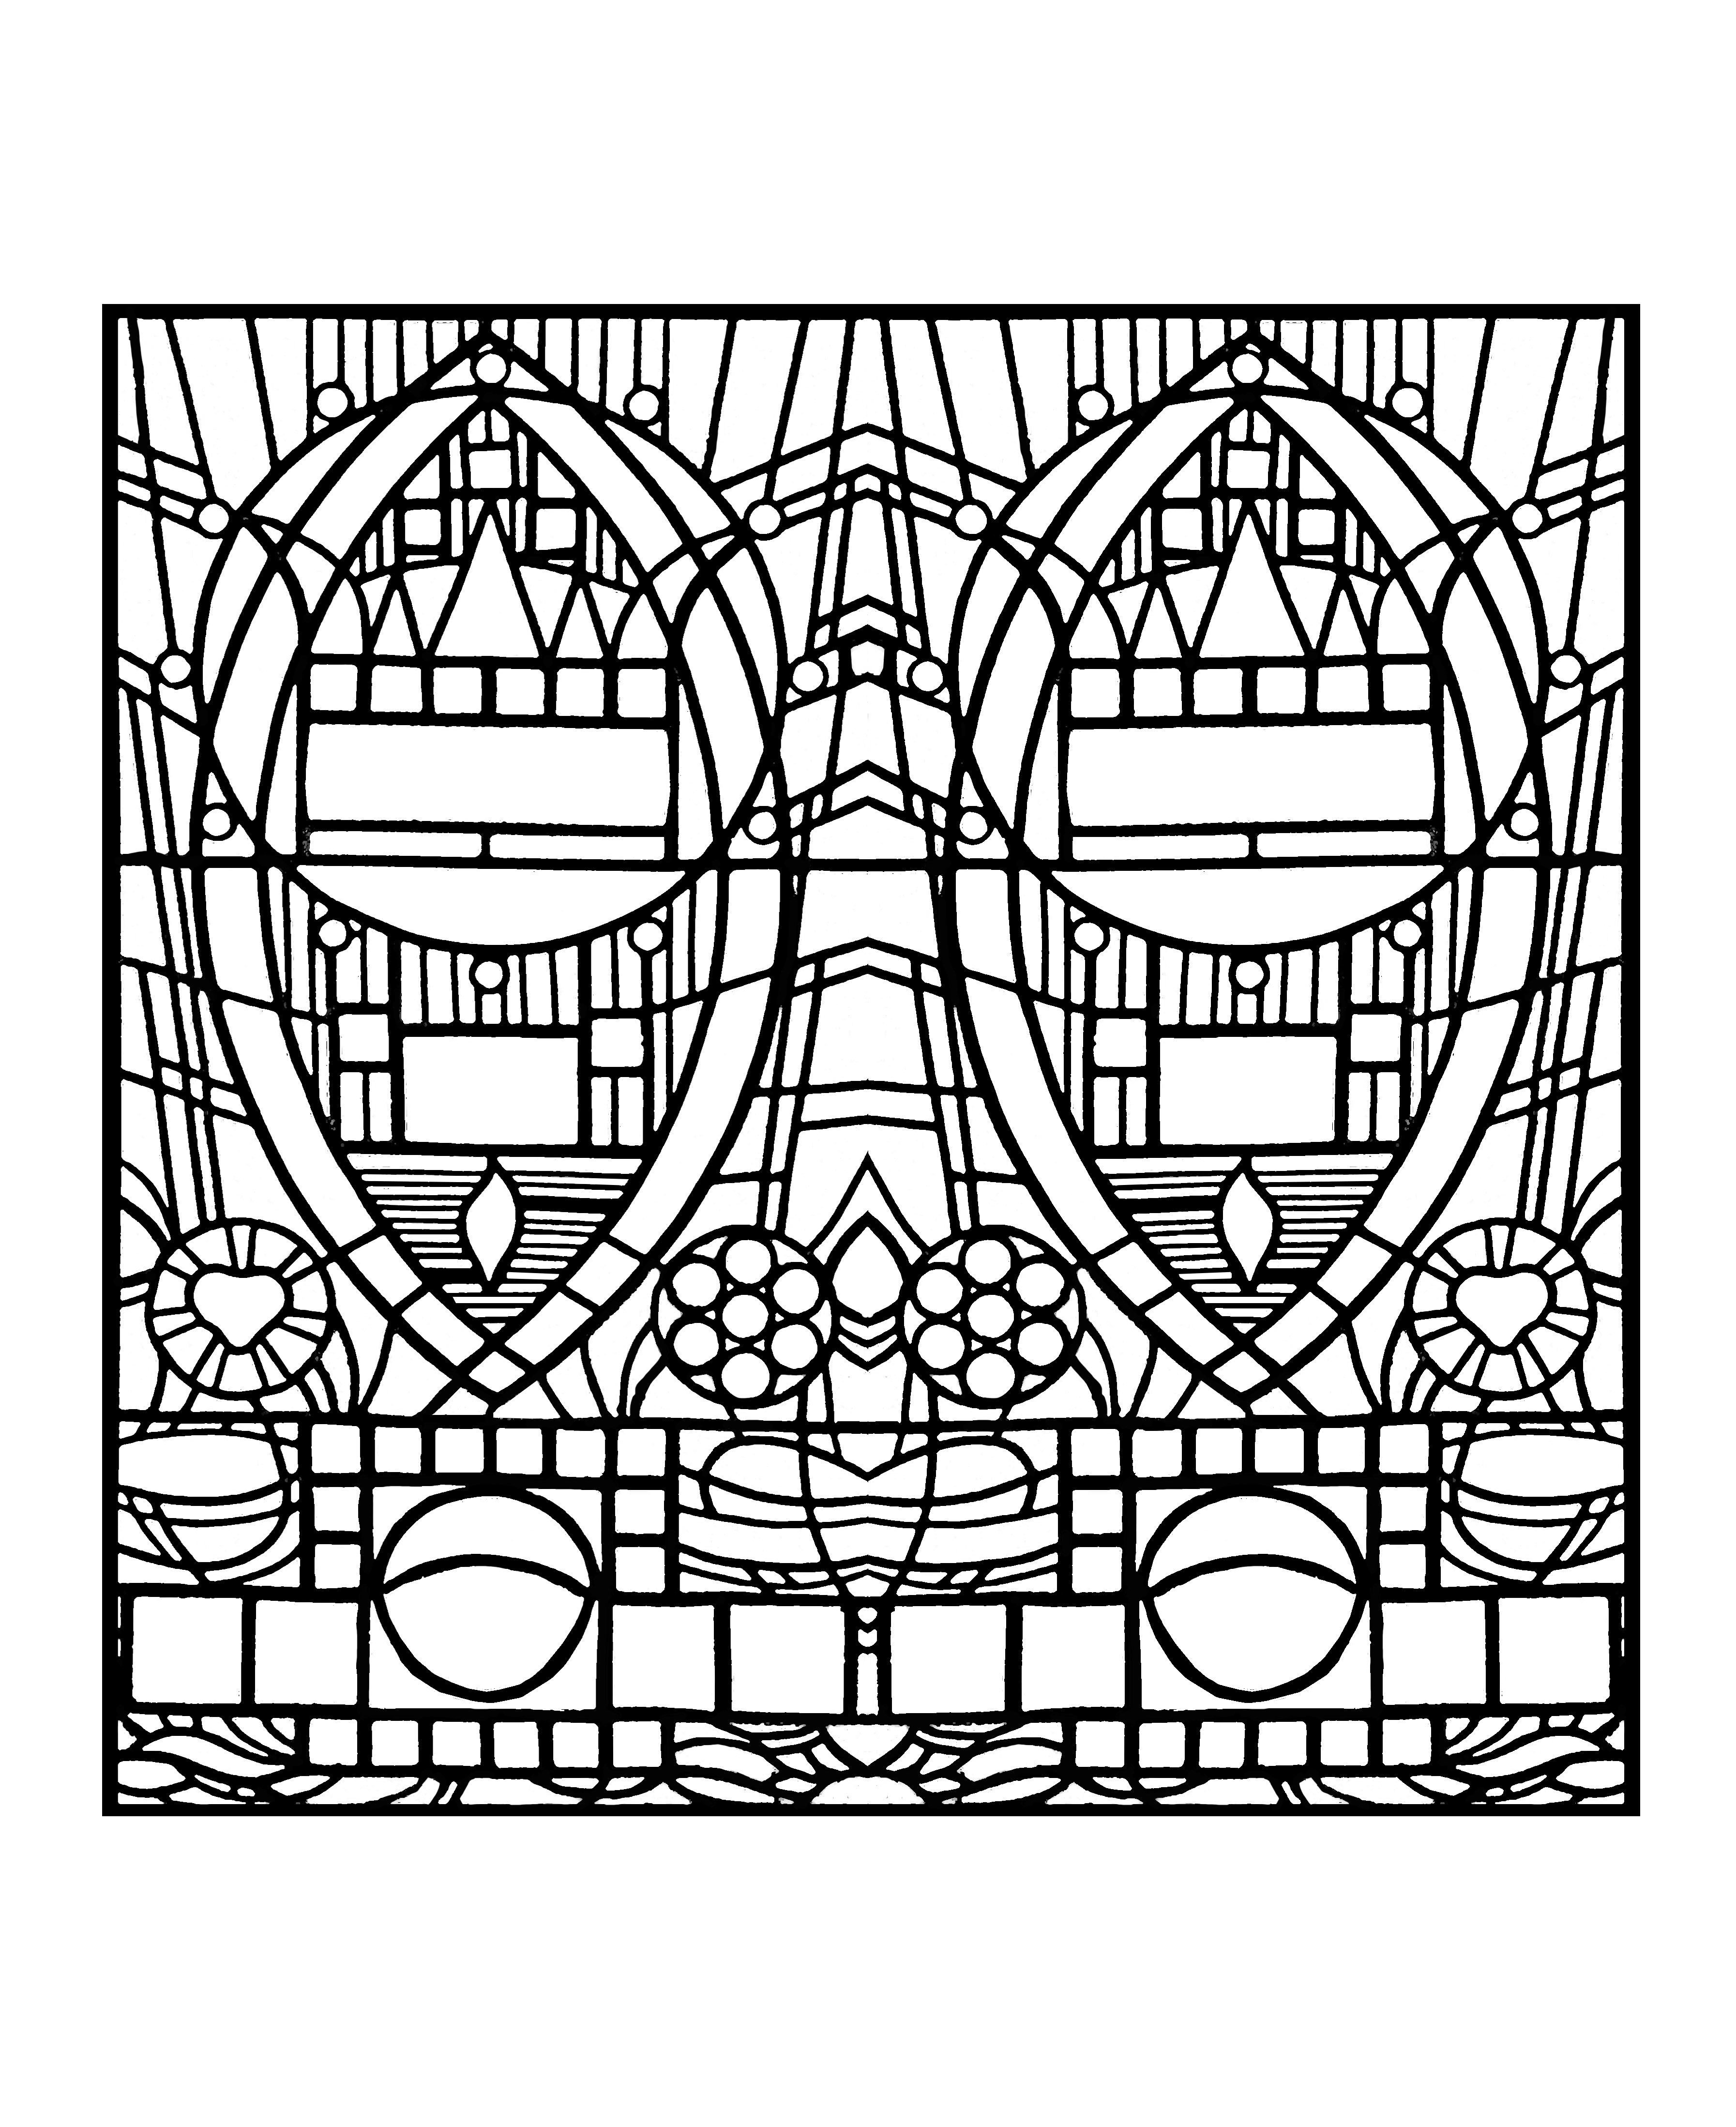 Coloring page made from a modern Stained glass : 'L'apparition bleue', Church of Edegem in France - square version